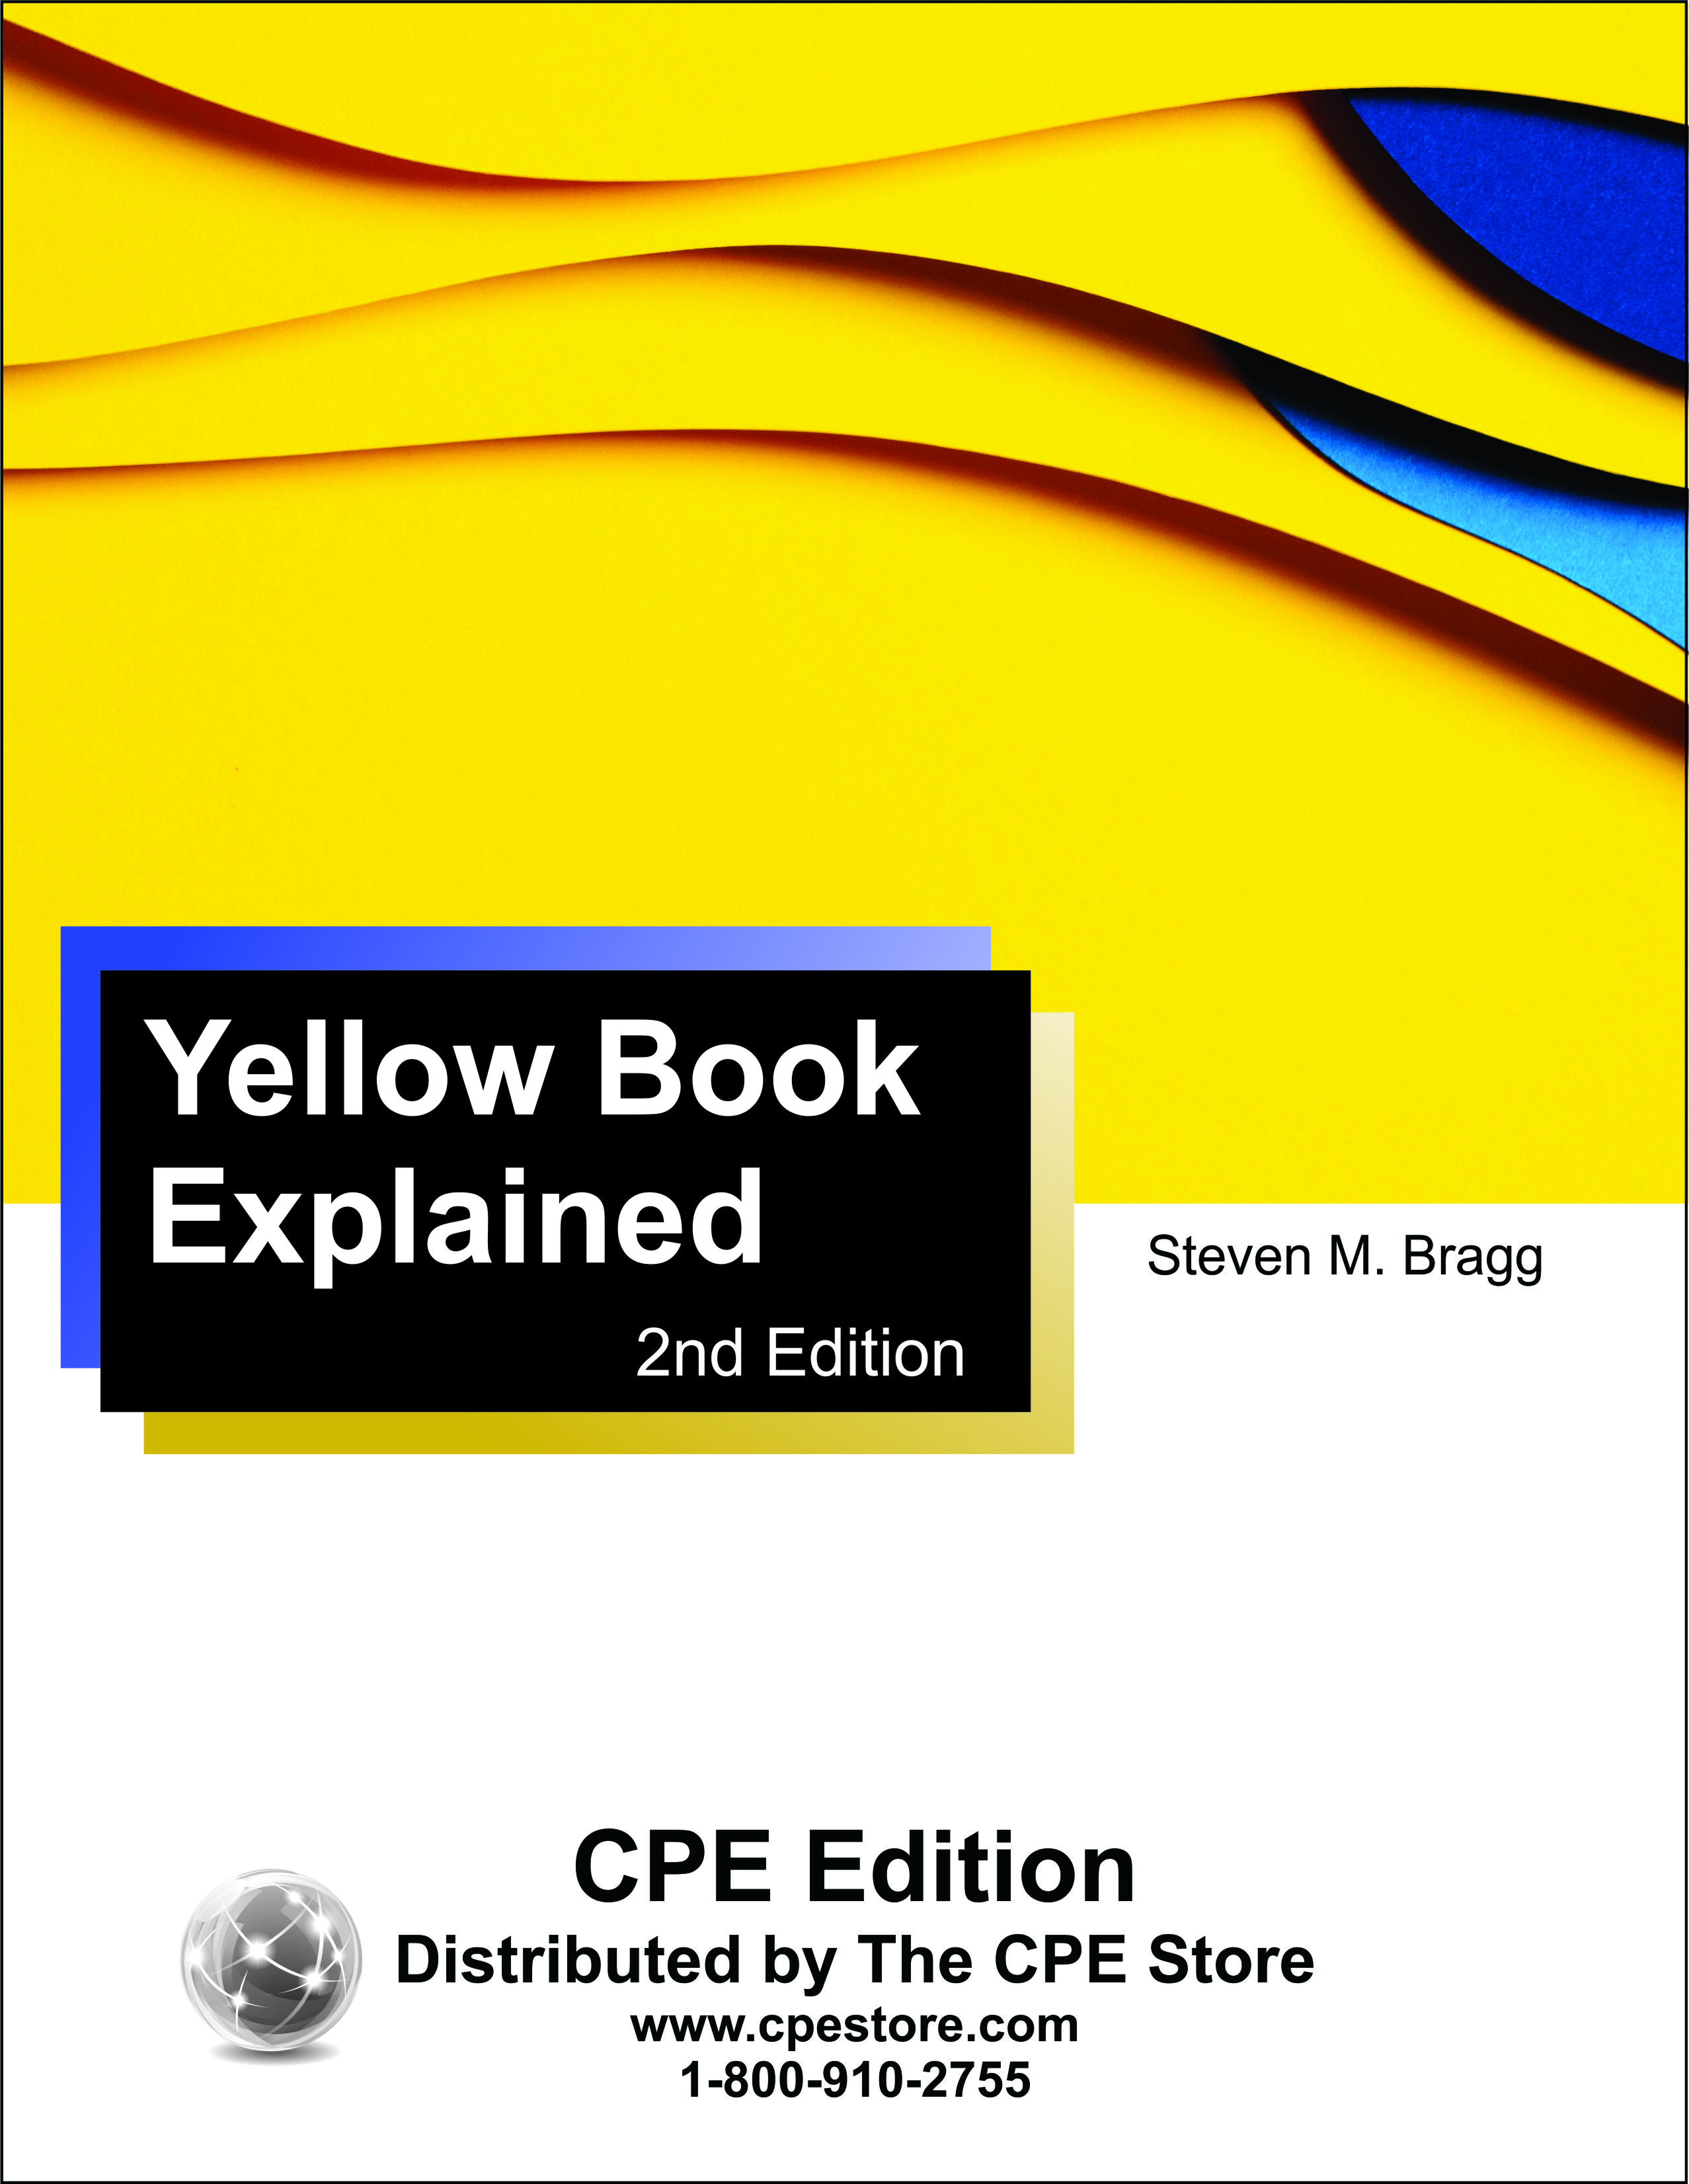 Yellow Book Explained